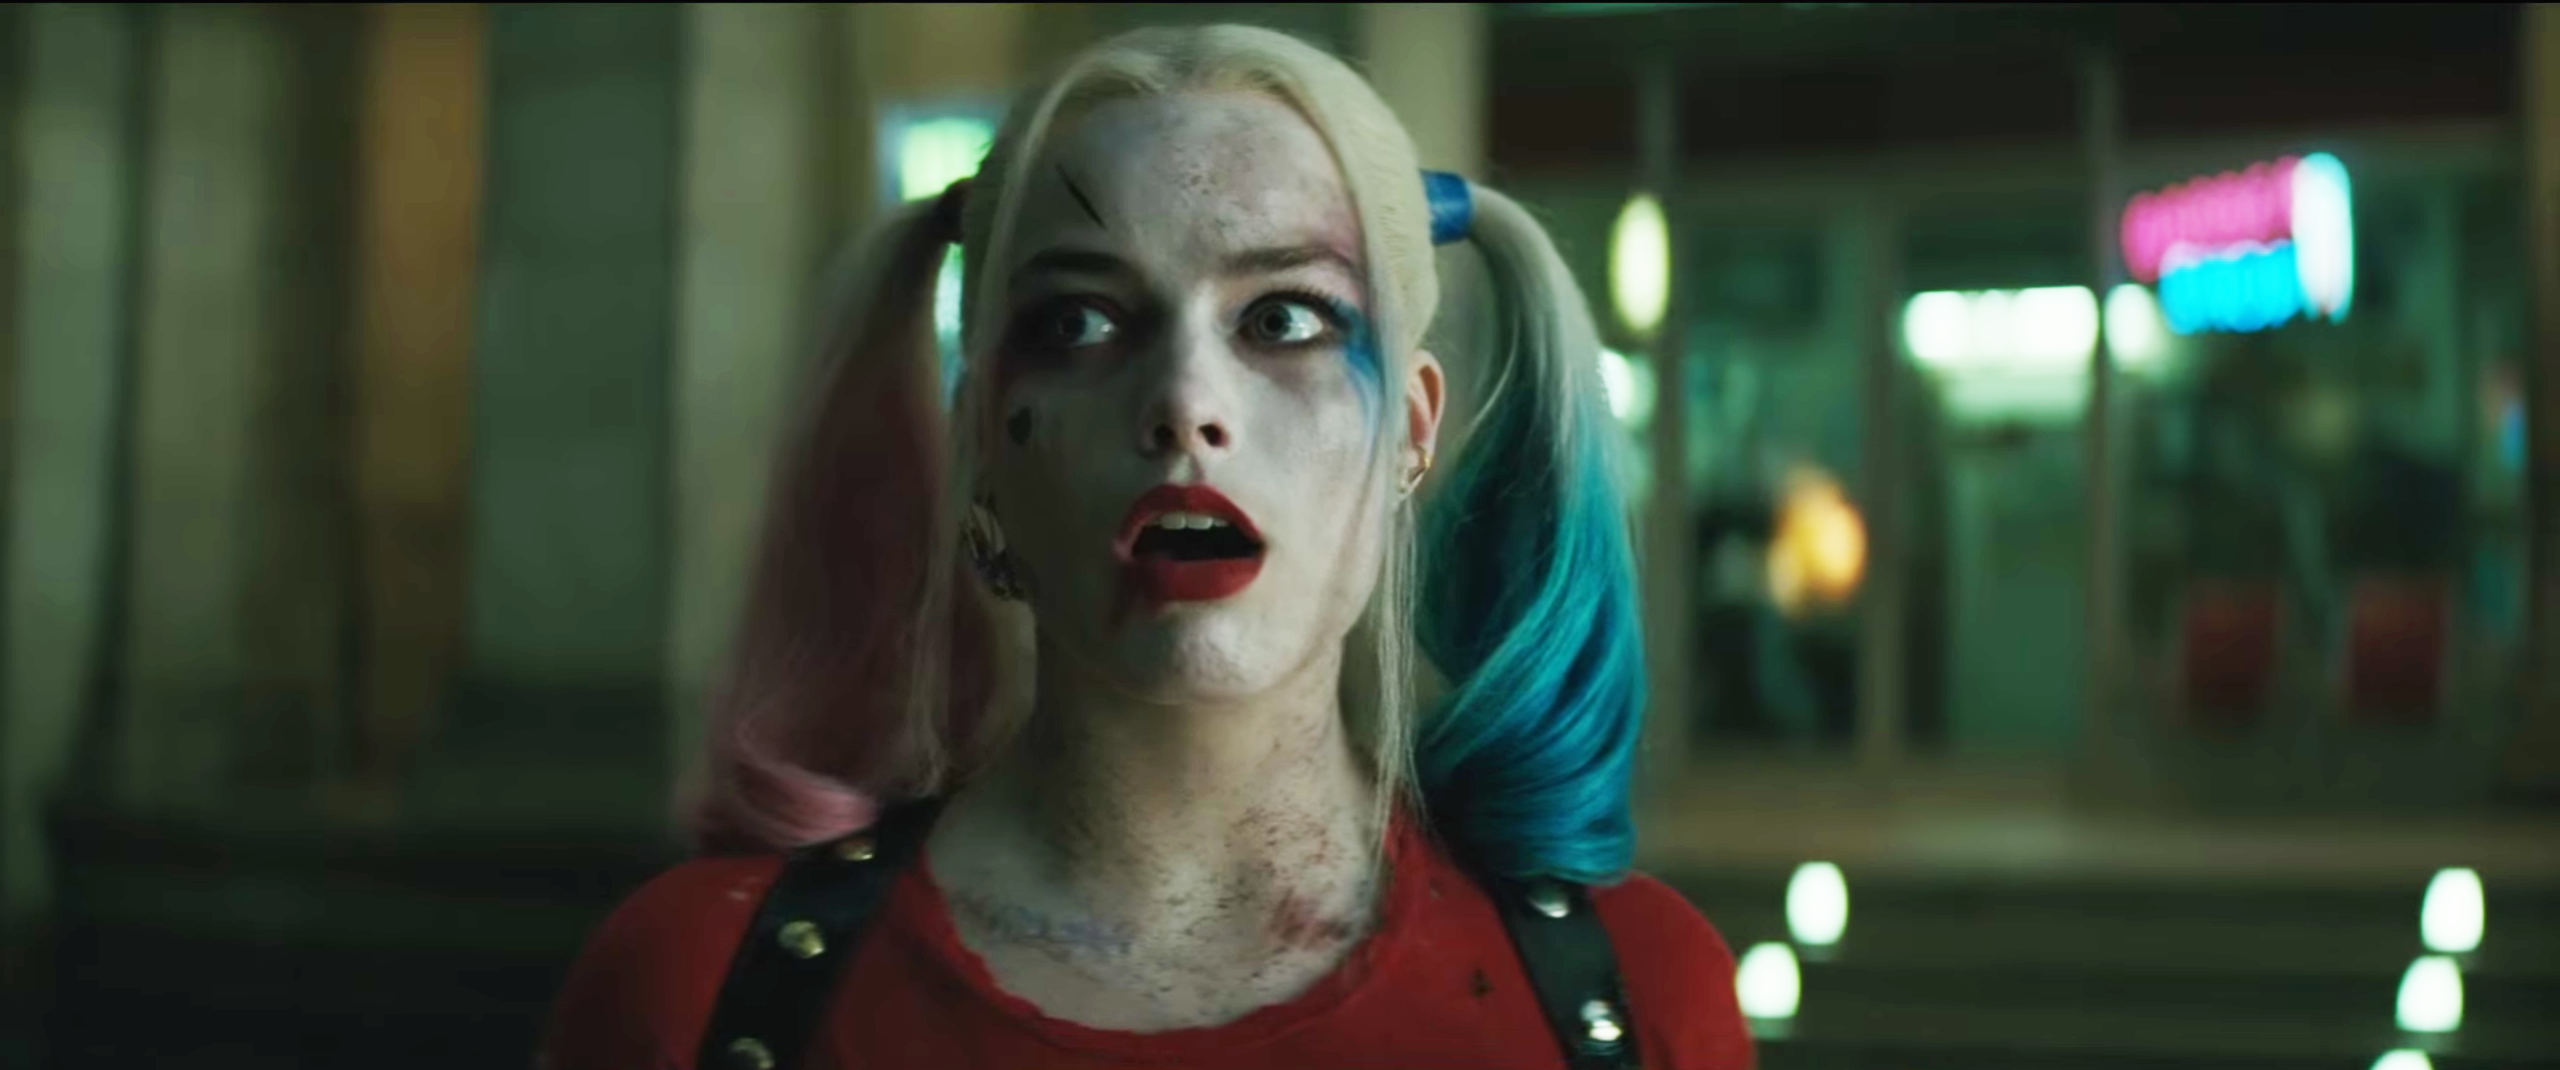 Suicide Squad Unseen Harley Quinn And Joker Picture Hints